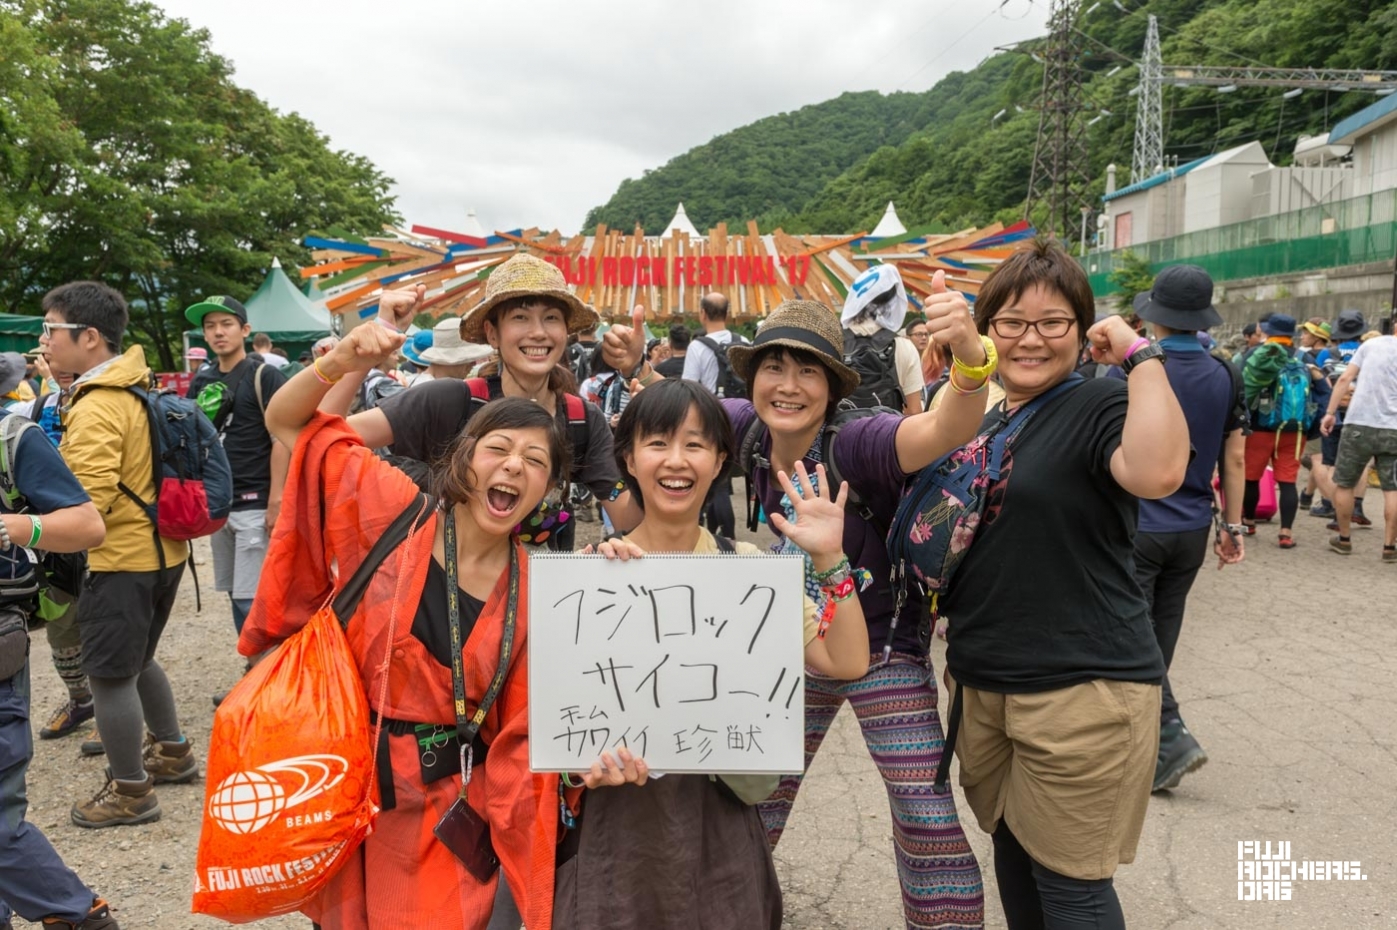 Message for Fujirock #24